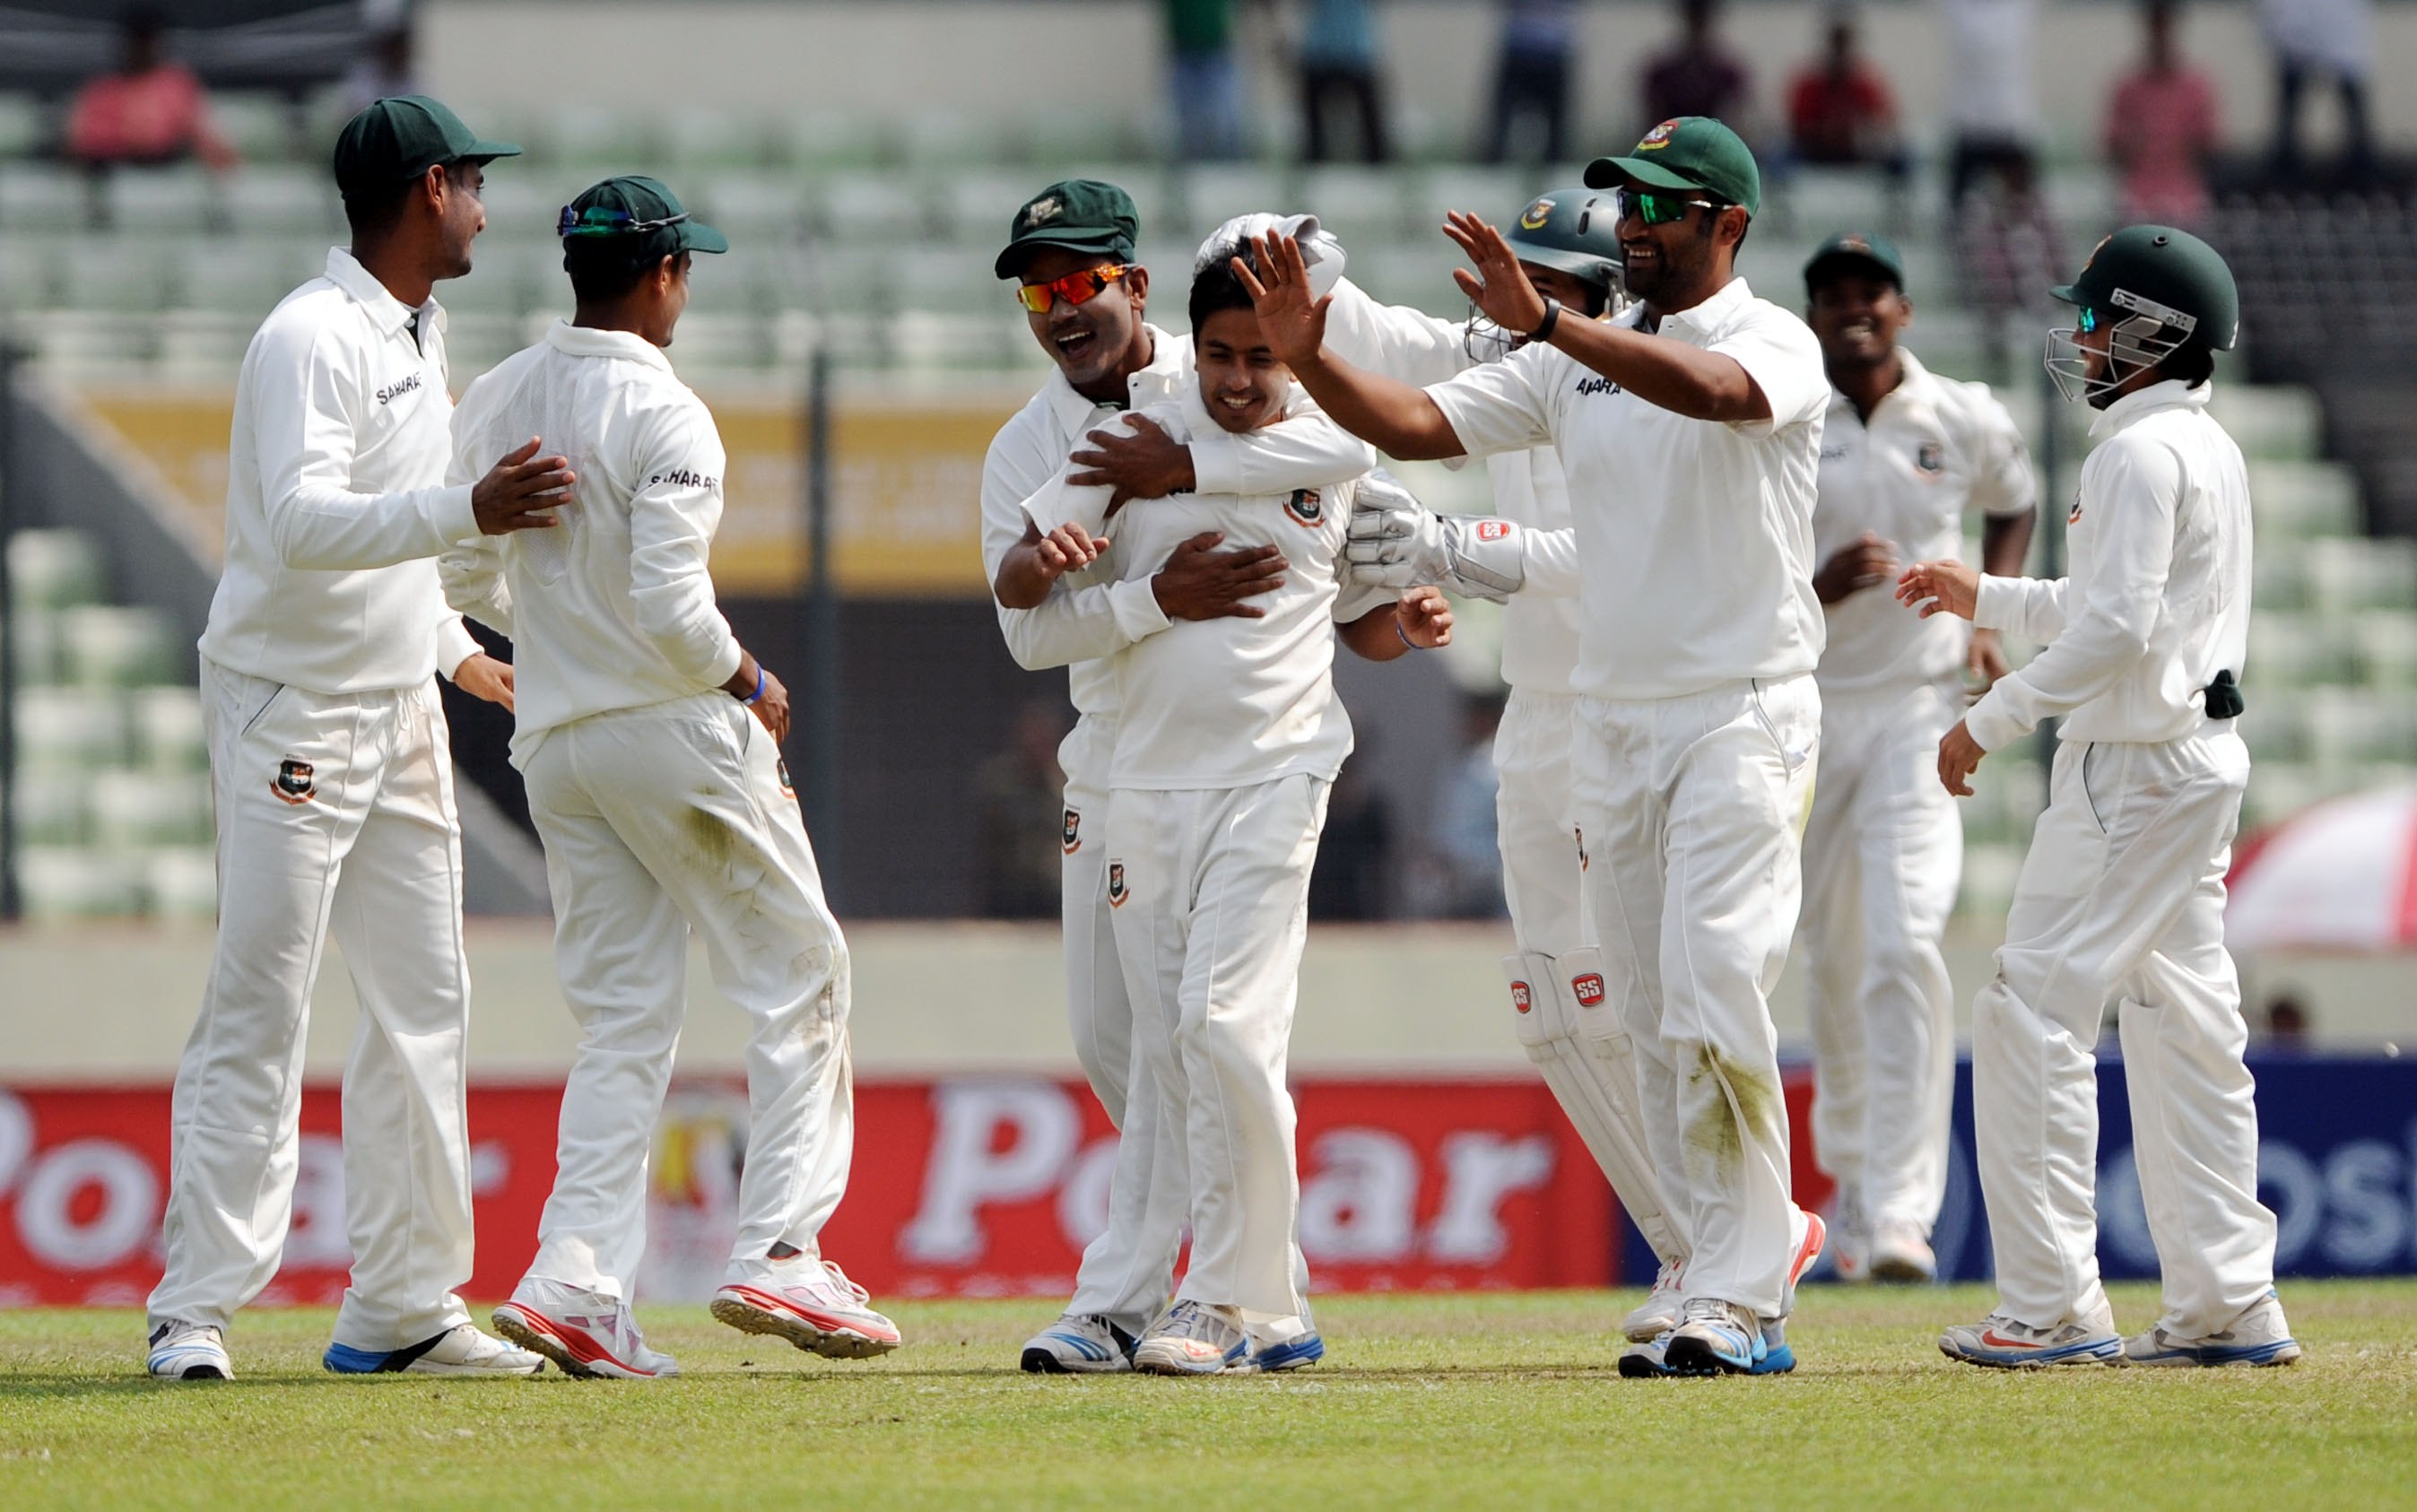 Zimbabwe fails to put final nail as Bangladesh clinch thrilling win in 1st Test